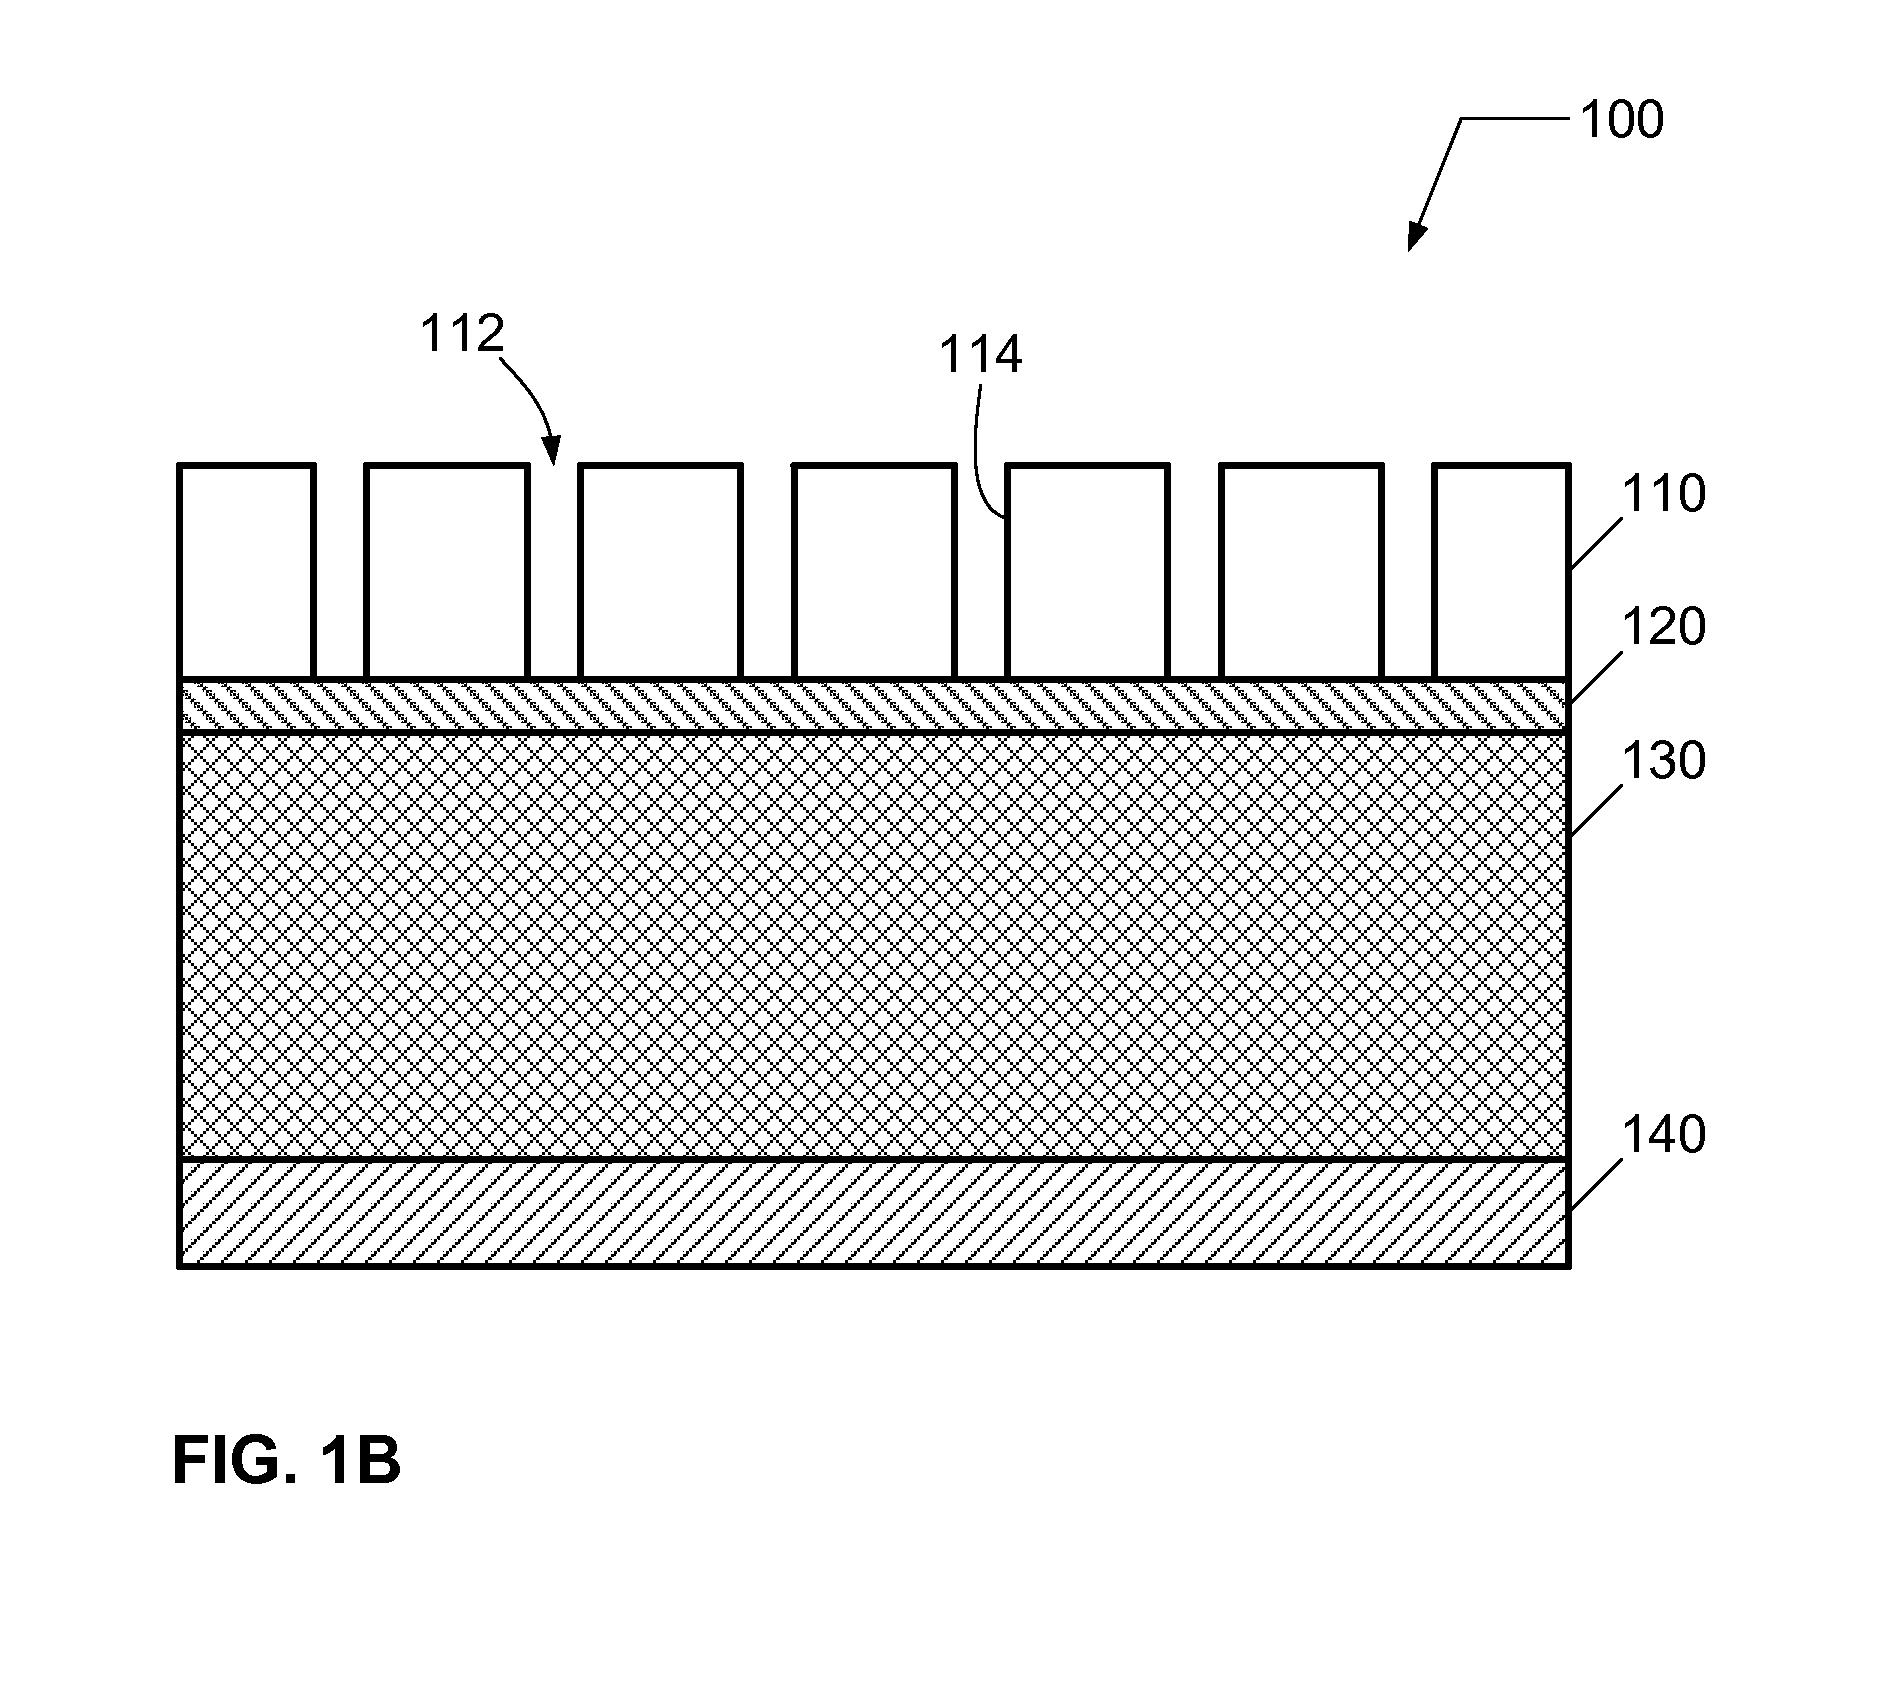 Method to remove capping layer of insulation dielectric in interconnect structures